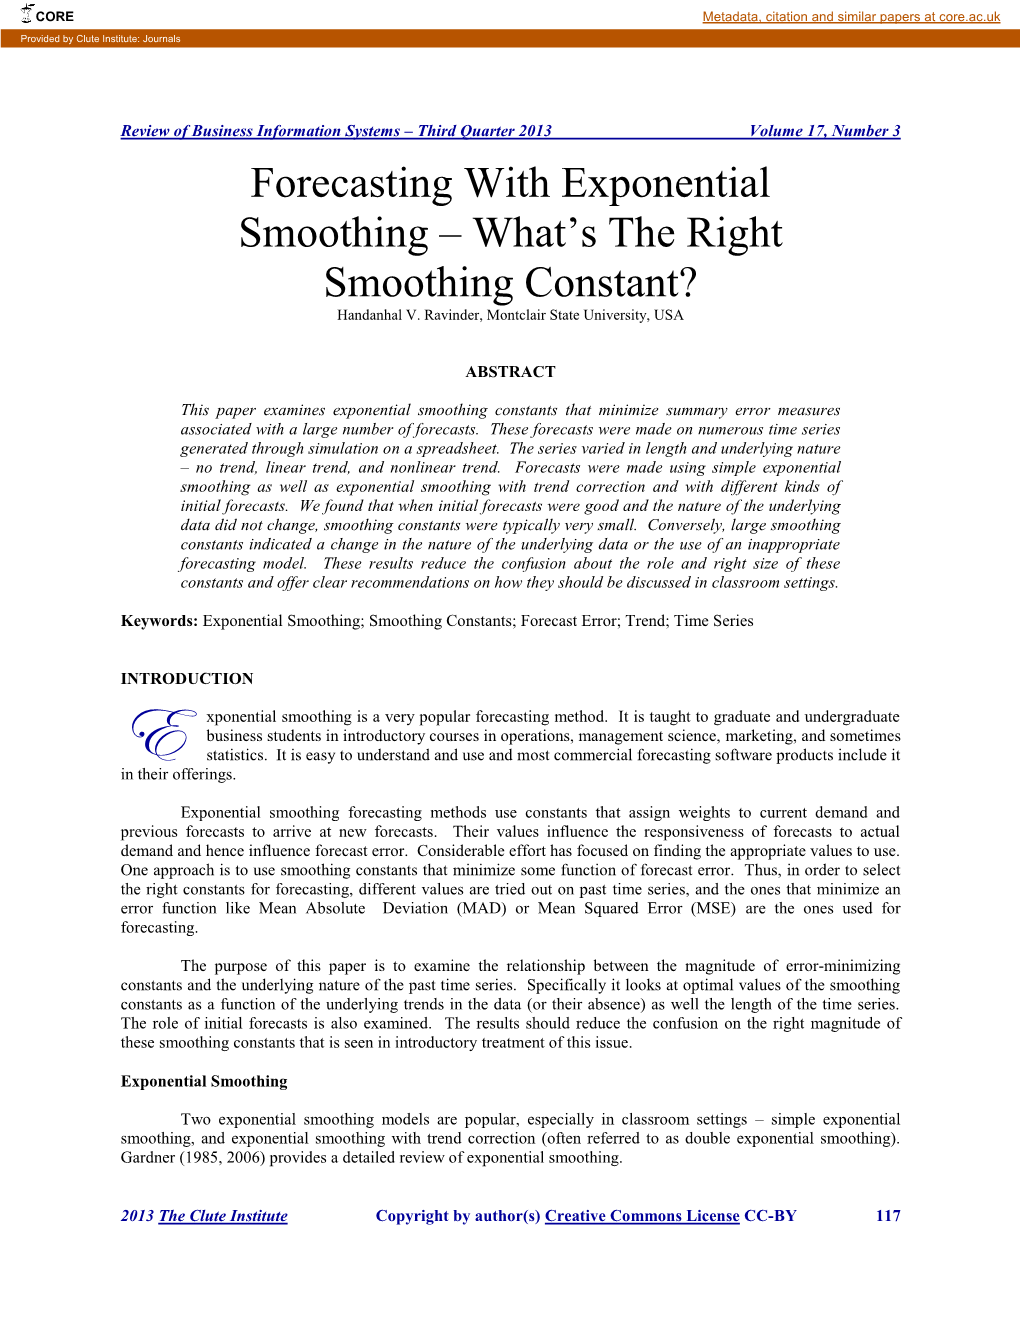 Forecasting with Exponential Smoothing – What’S the Right Smoothing Constant? Handanhal V